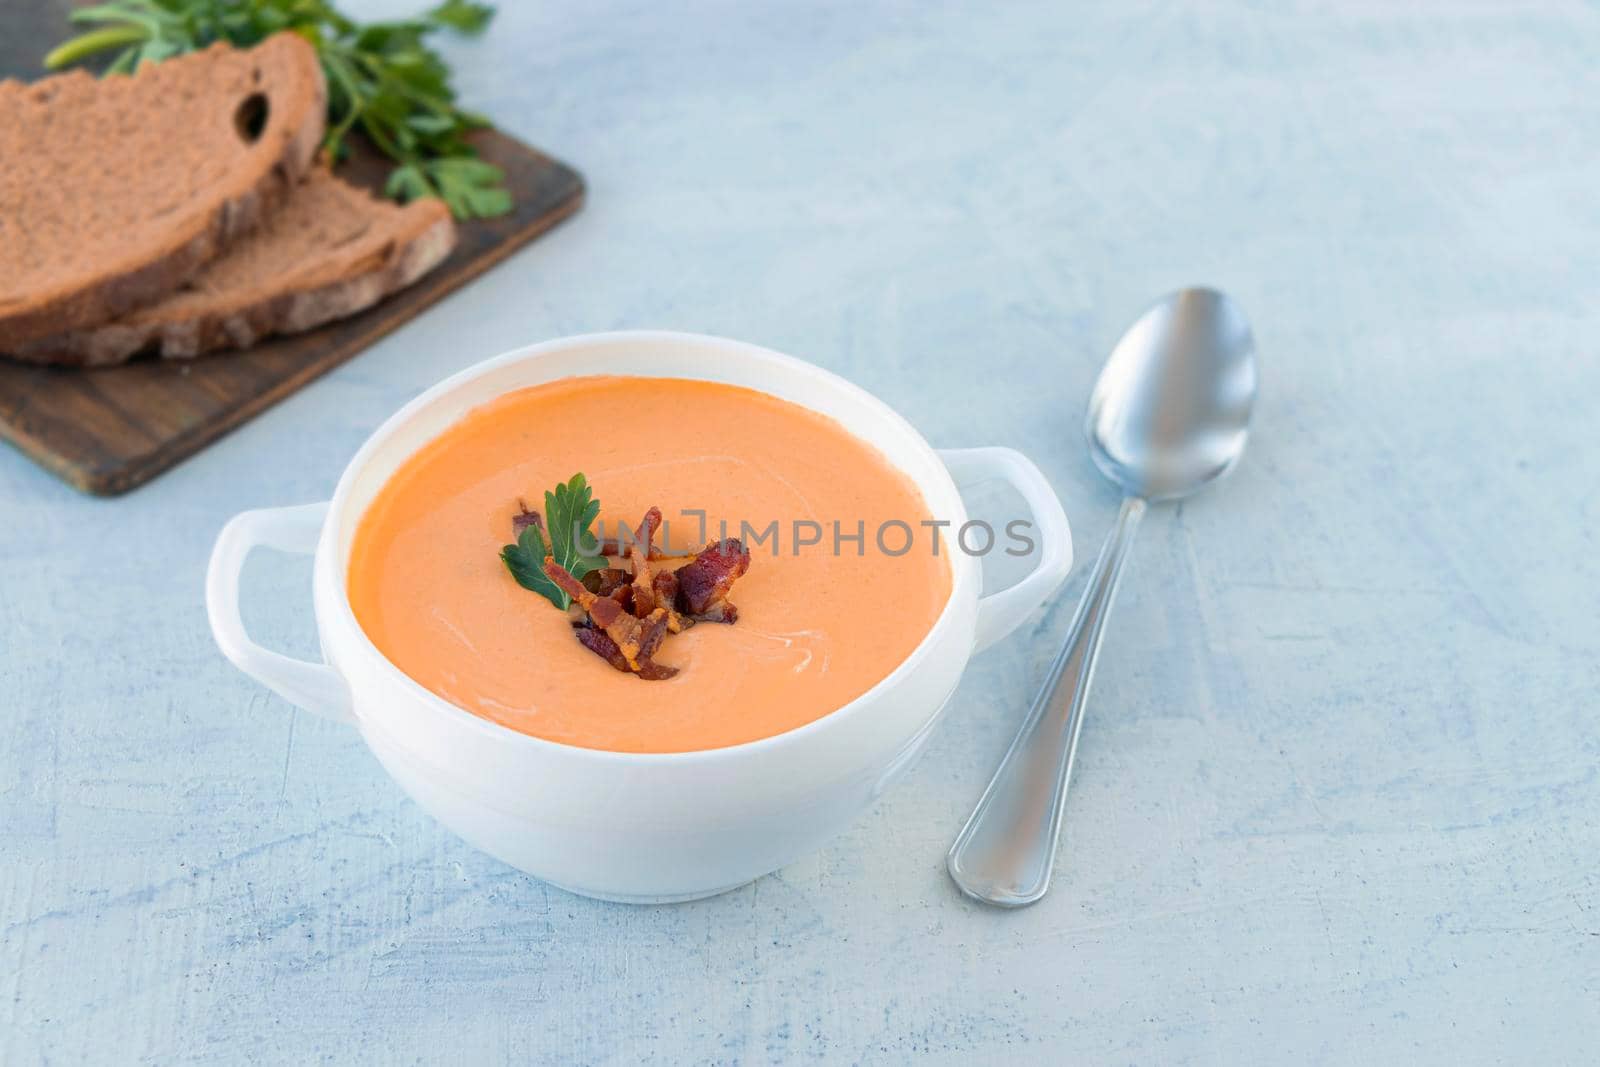 pumpkin soup with fried bacon, served in a white tureen with a spoon and slices of bread and parsley. warming hearty orange soup on a cold autumn day. copy space